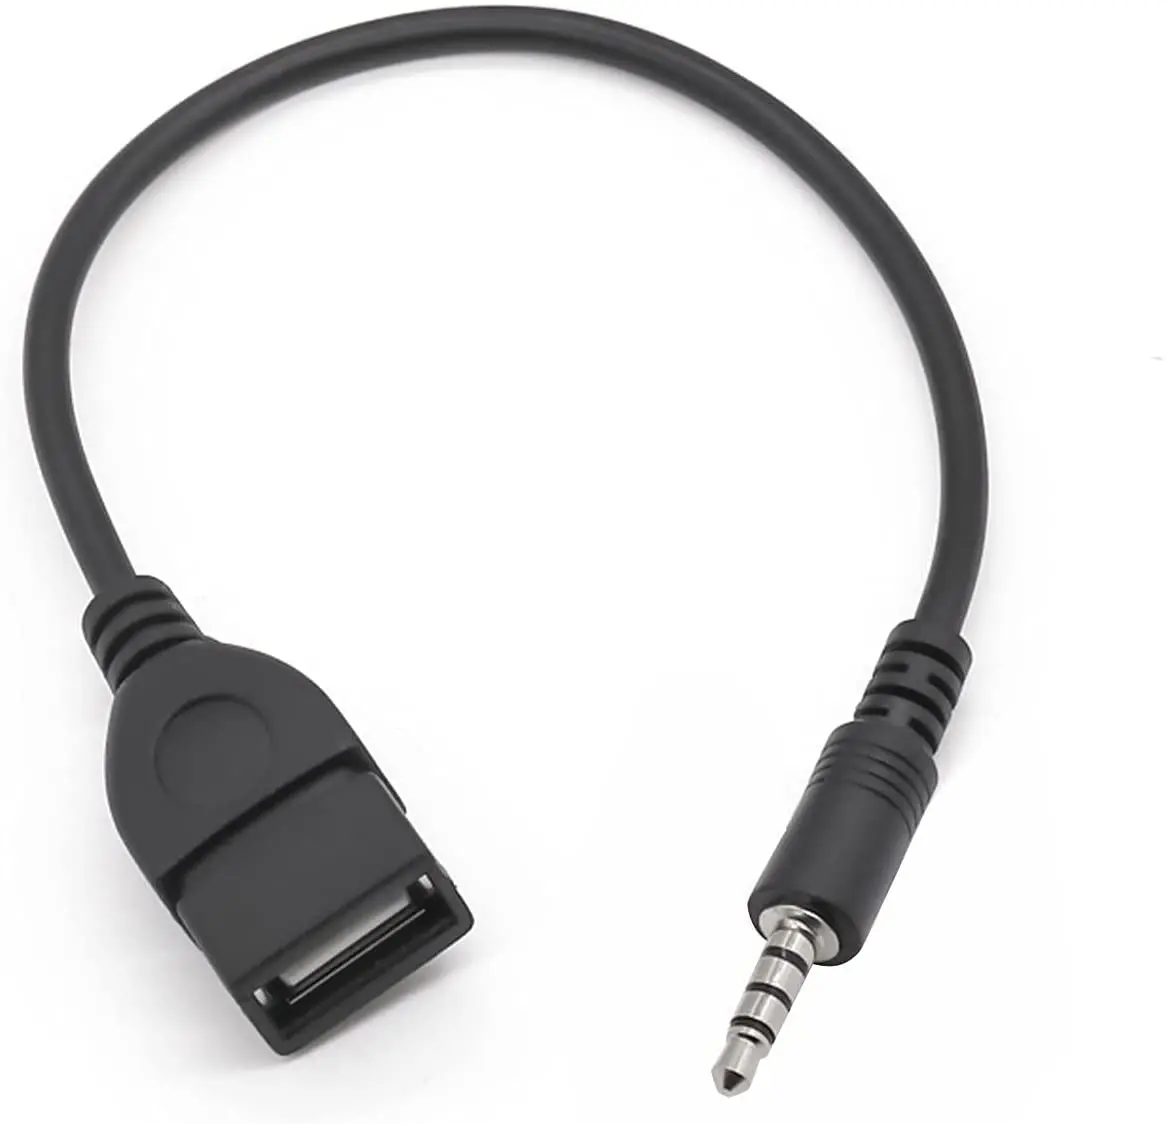 3.5mm Male Aux Audio Plug To Usb A Female Jack Otg Converter Lead Adapter - Buy 3.5mm Aux Cable,For Car 3.5mm Aux Cable,3.5mm To Usb 2.0 Adapter on Alibaba.com